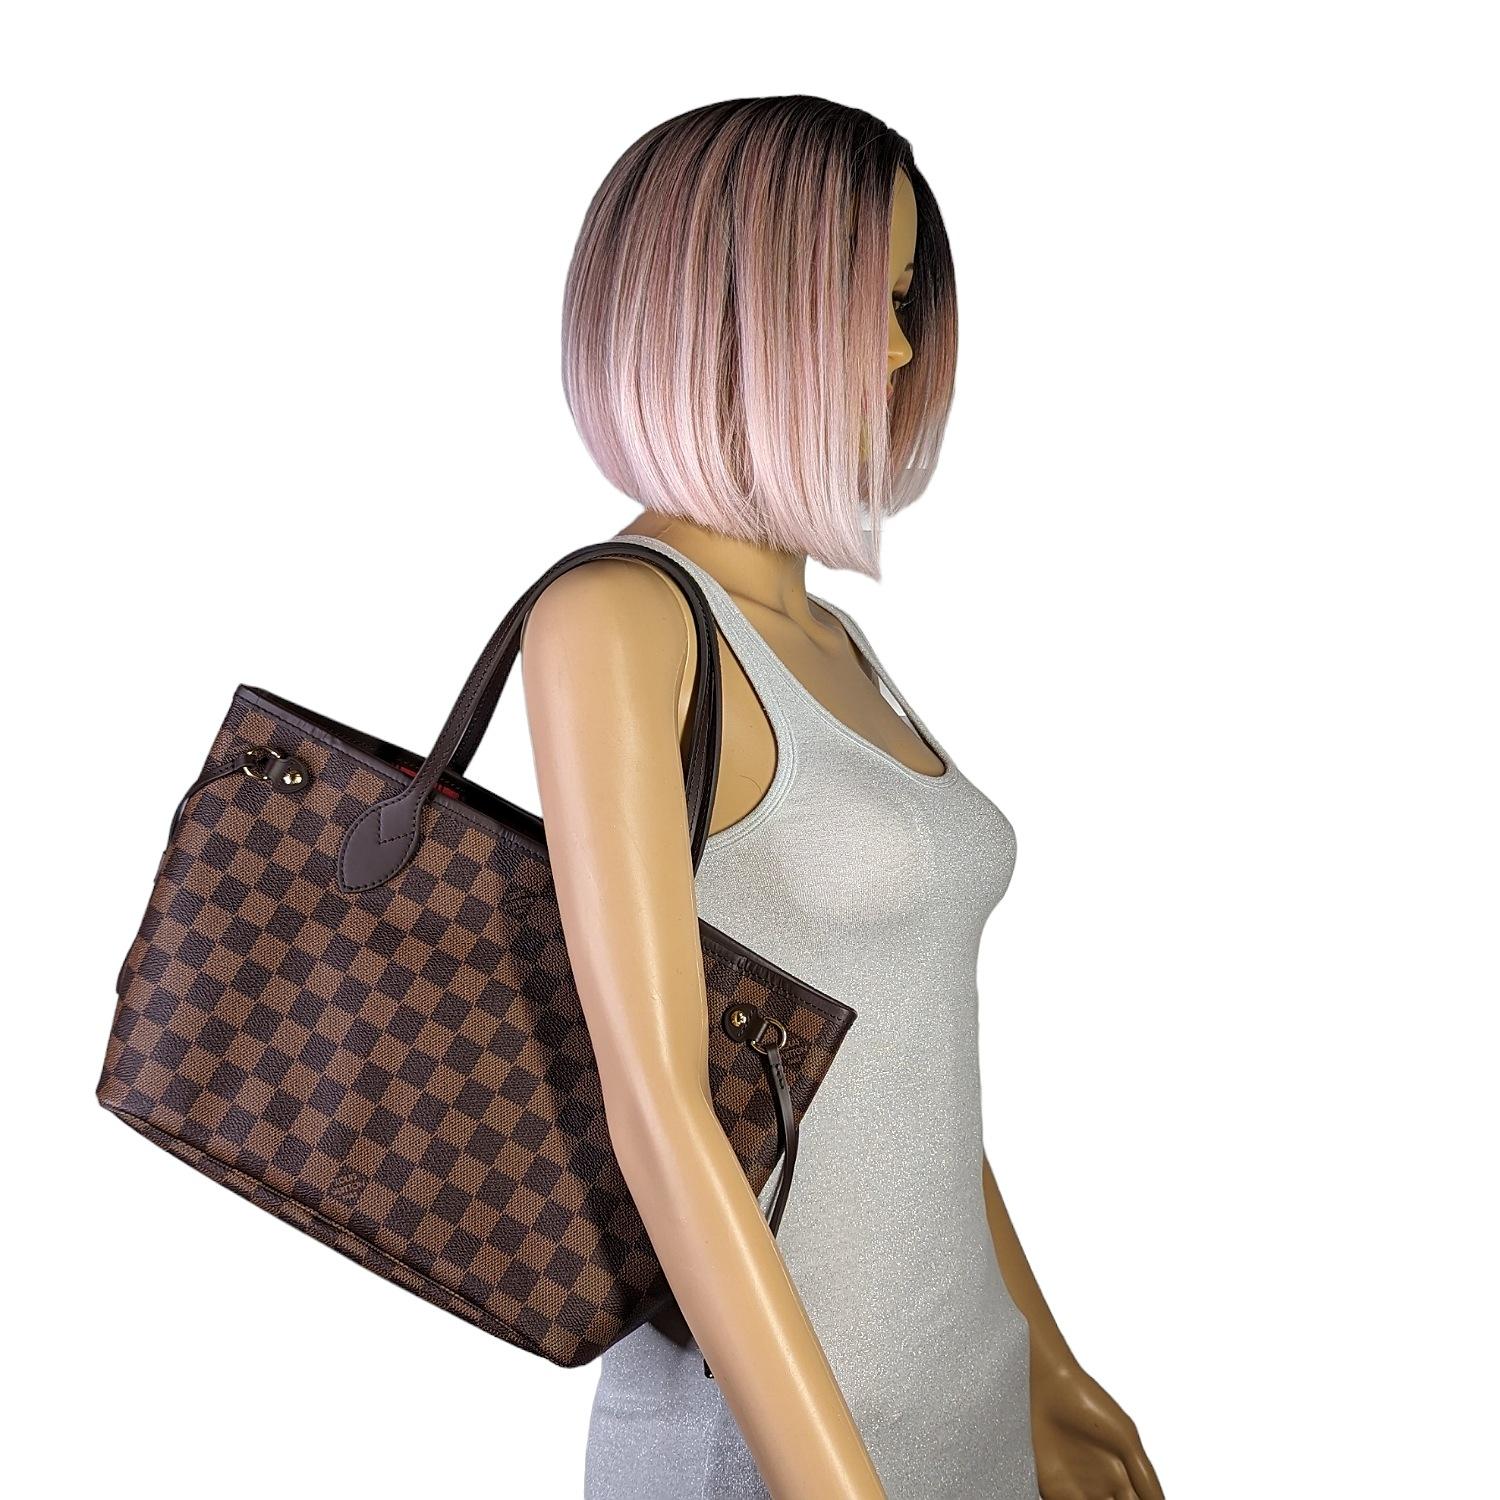 This chic tote is crafted of classic Louis Vuitton damier patterned canvas with brown cowhide leather trim including strap handles. The top is open to a rouge red striped fabric interior with a hanging zipper pocket and match pochette. Est. Retail